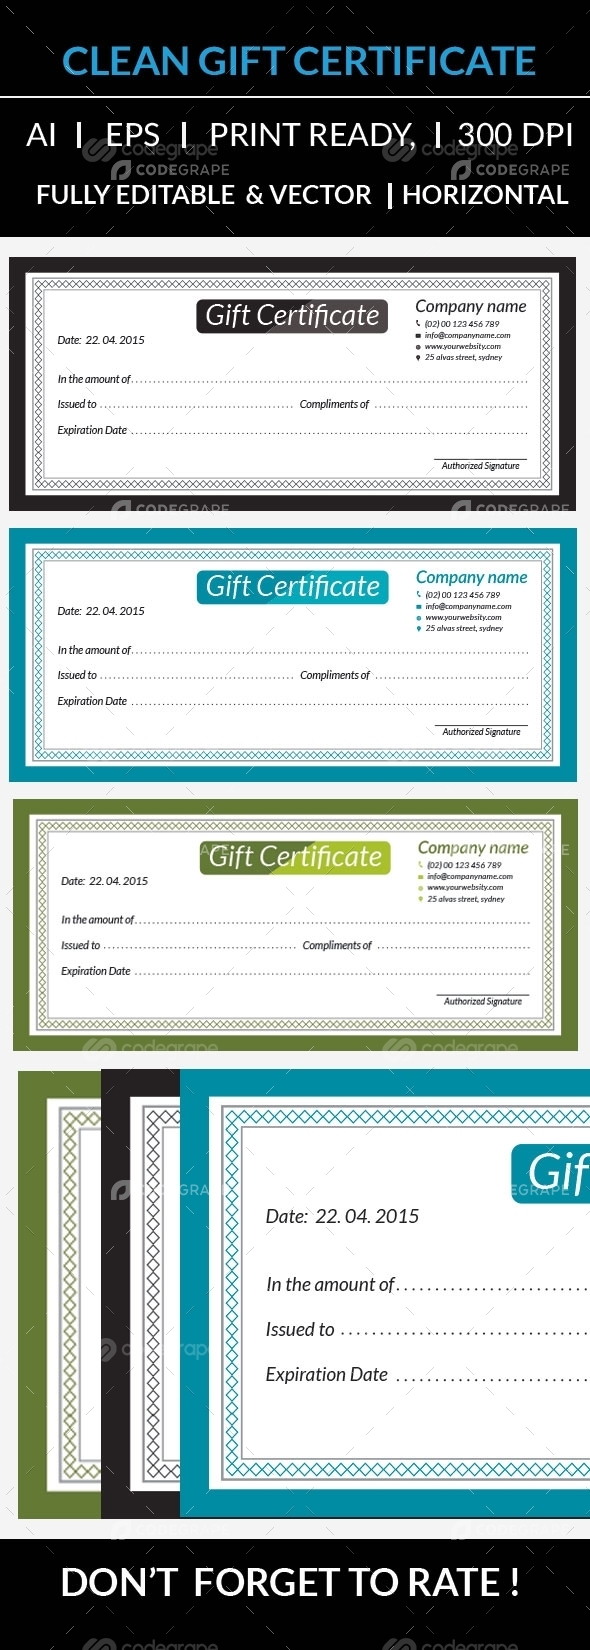 Clean Gift Certificates